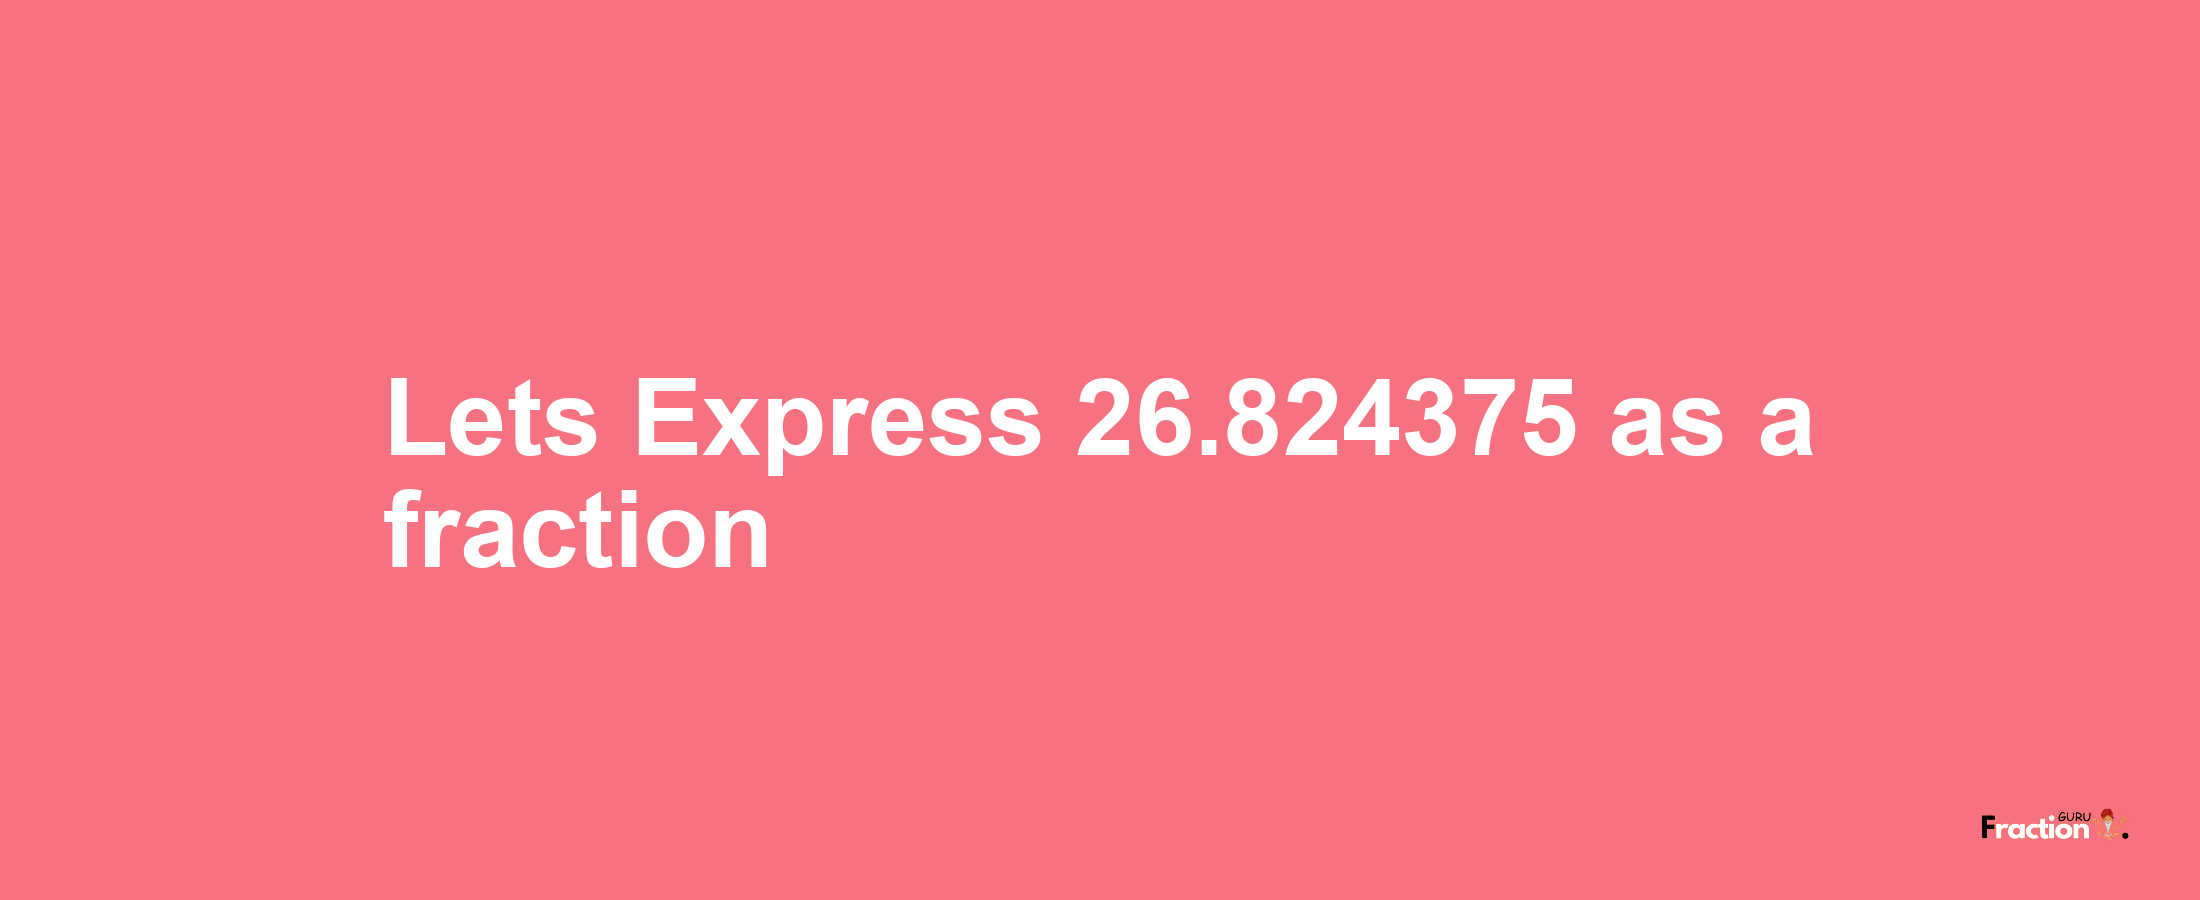 Lets Express 26.824375 as afraction